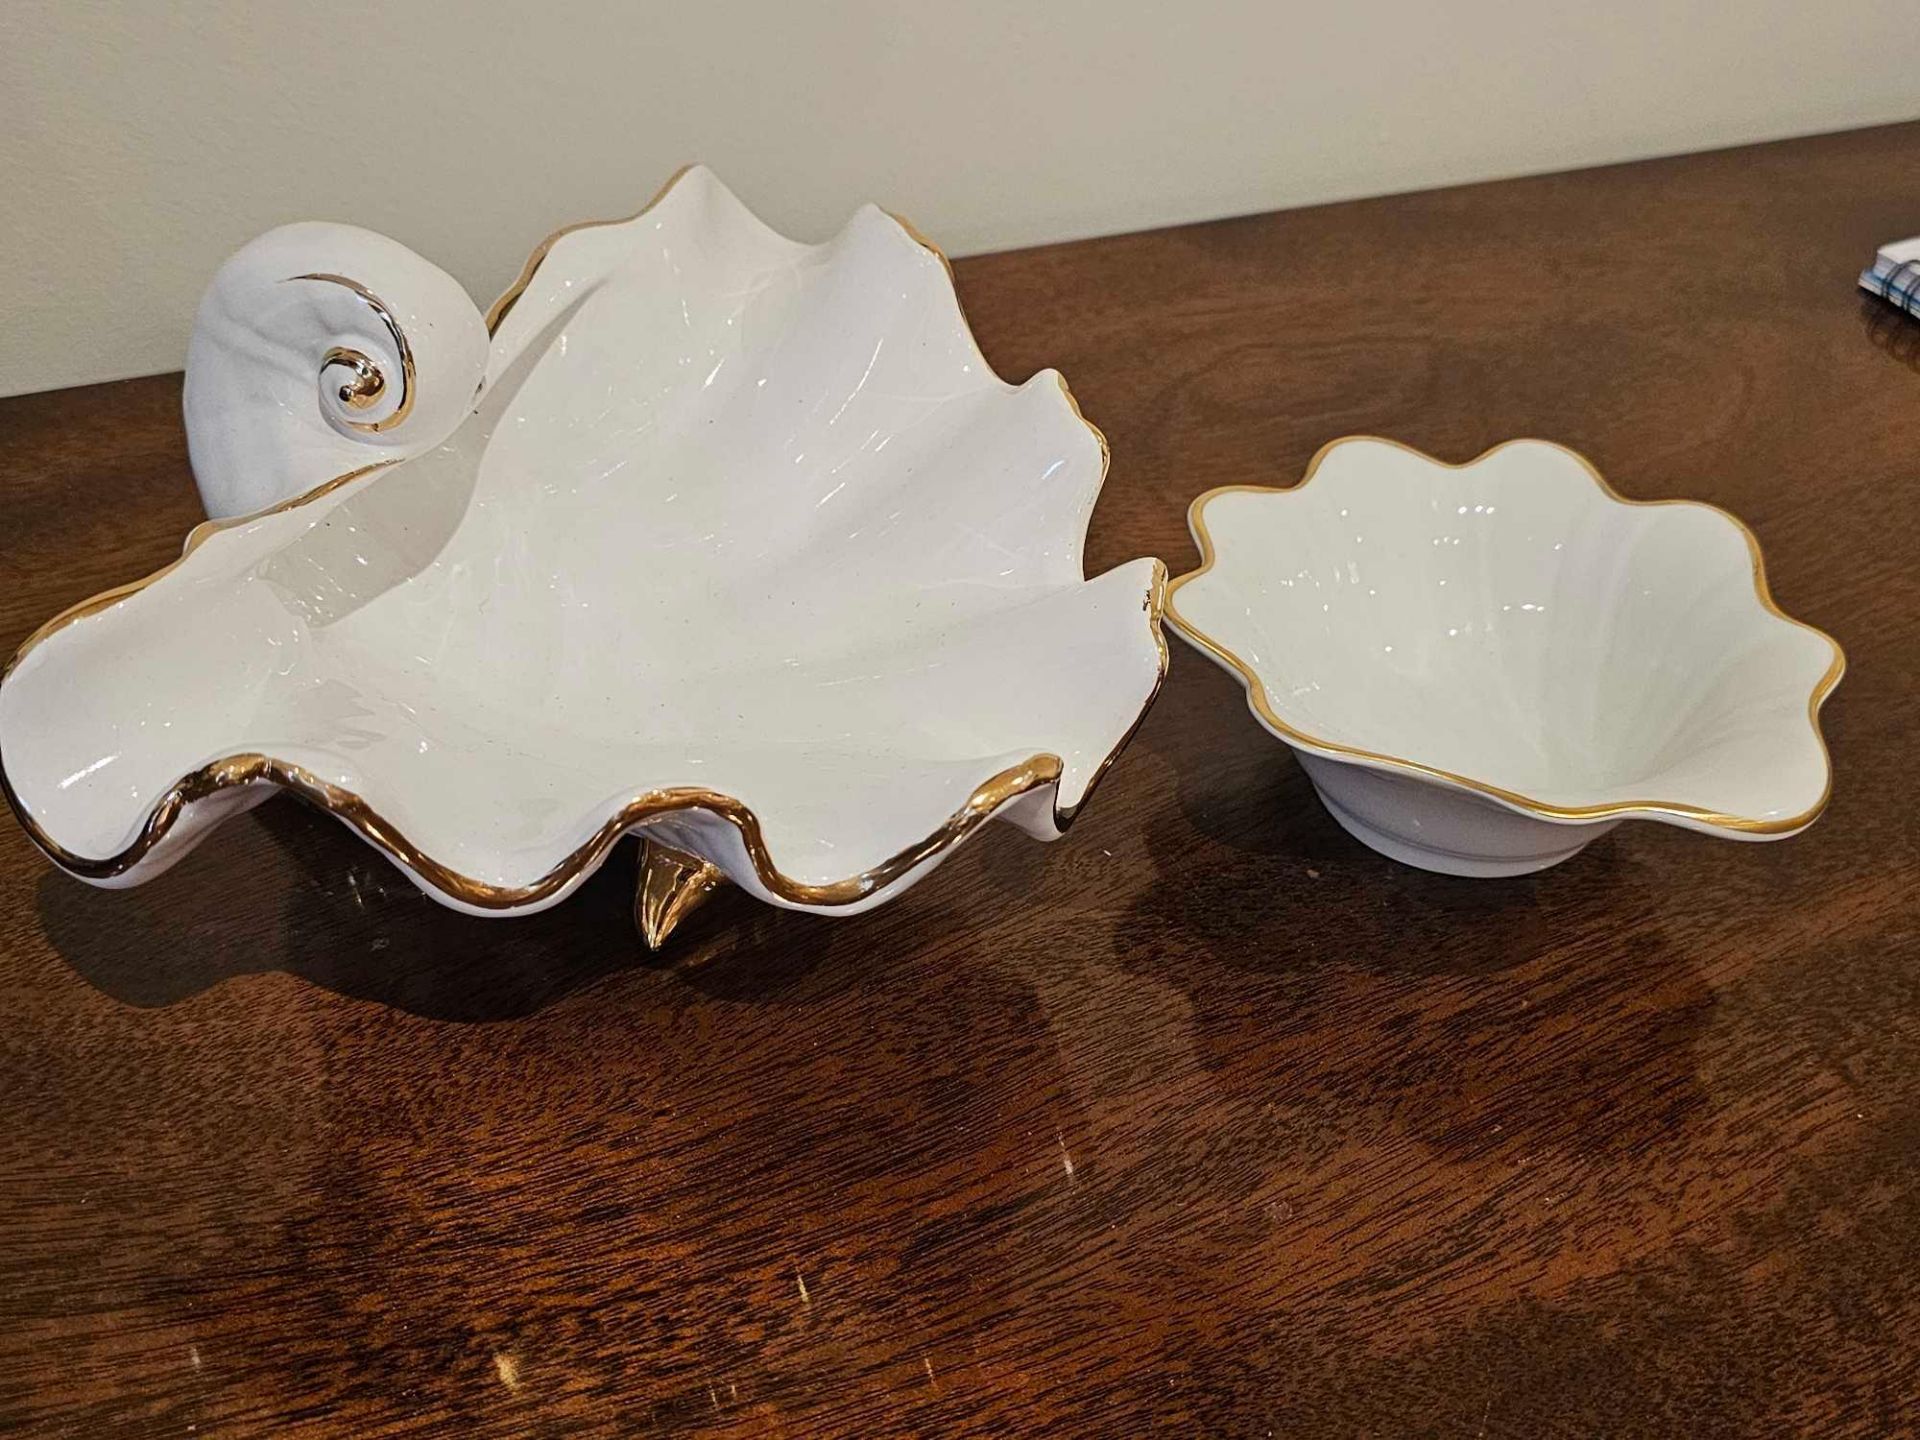 Martan Portugal 704 Shaped White And Gold Dish And A Royal Worcester Porcelain White And Gold Shaped